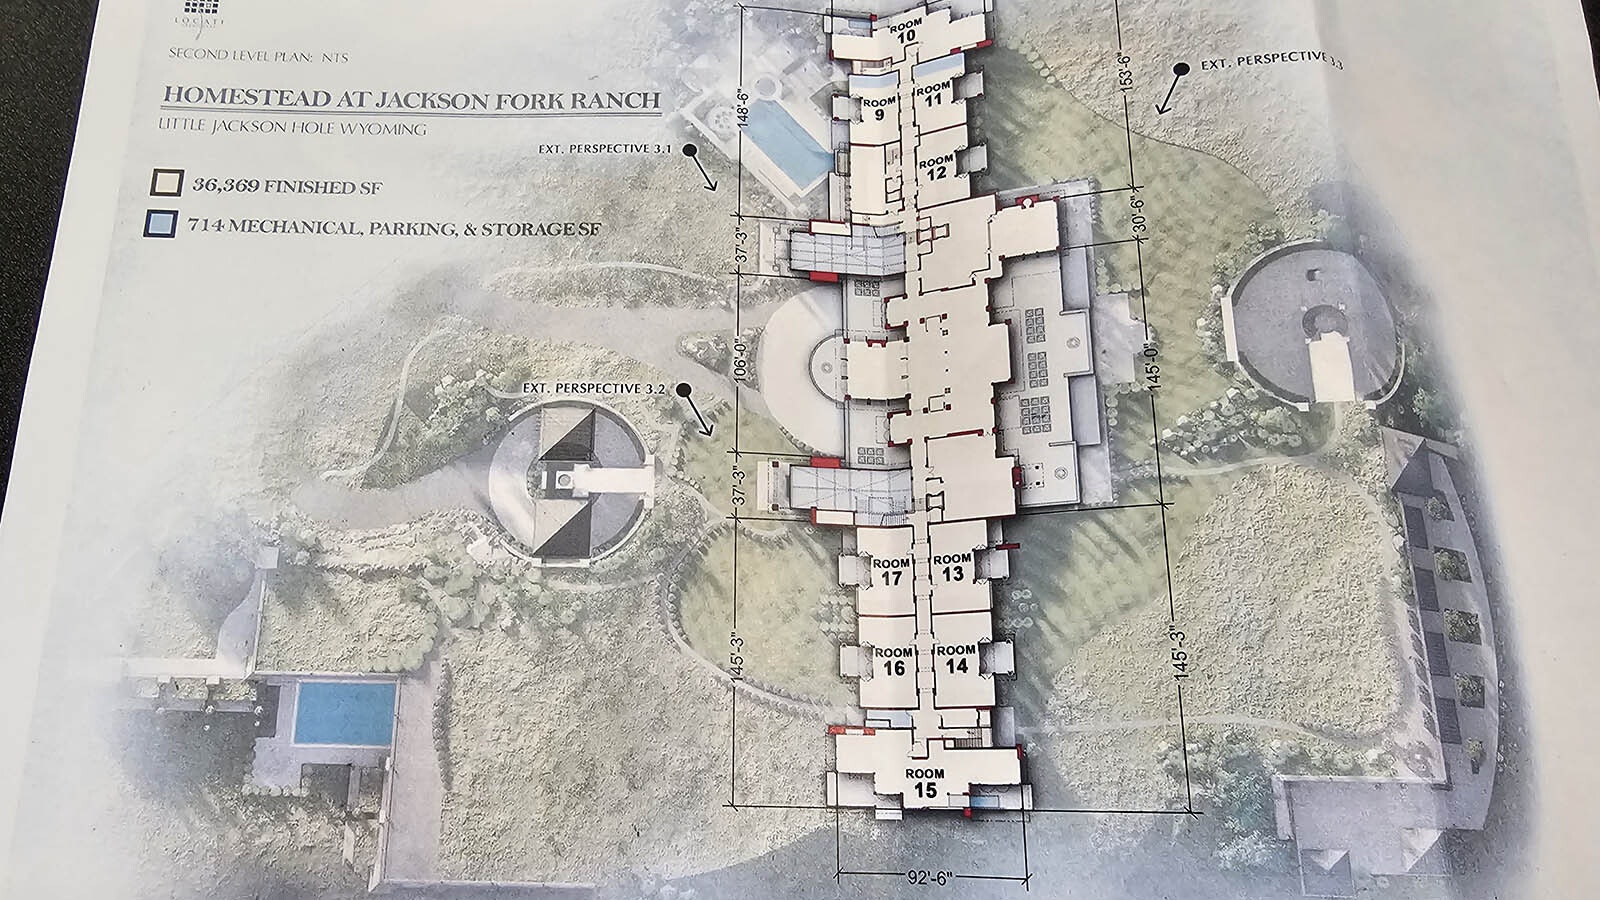 Architectural drawings about plans for the homestead at Jackson Fork Ranch in "Little Jackson Hole."